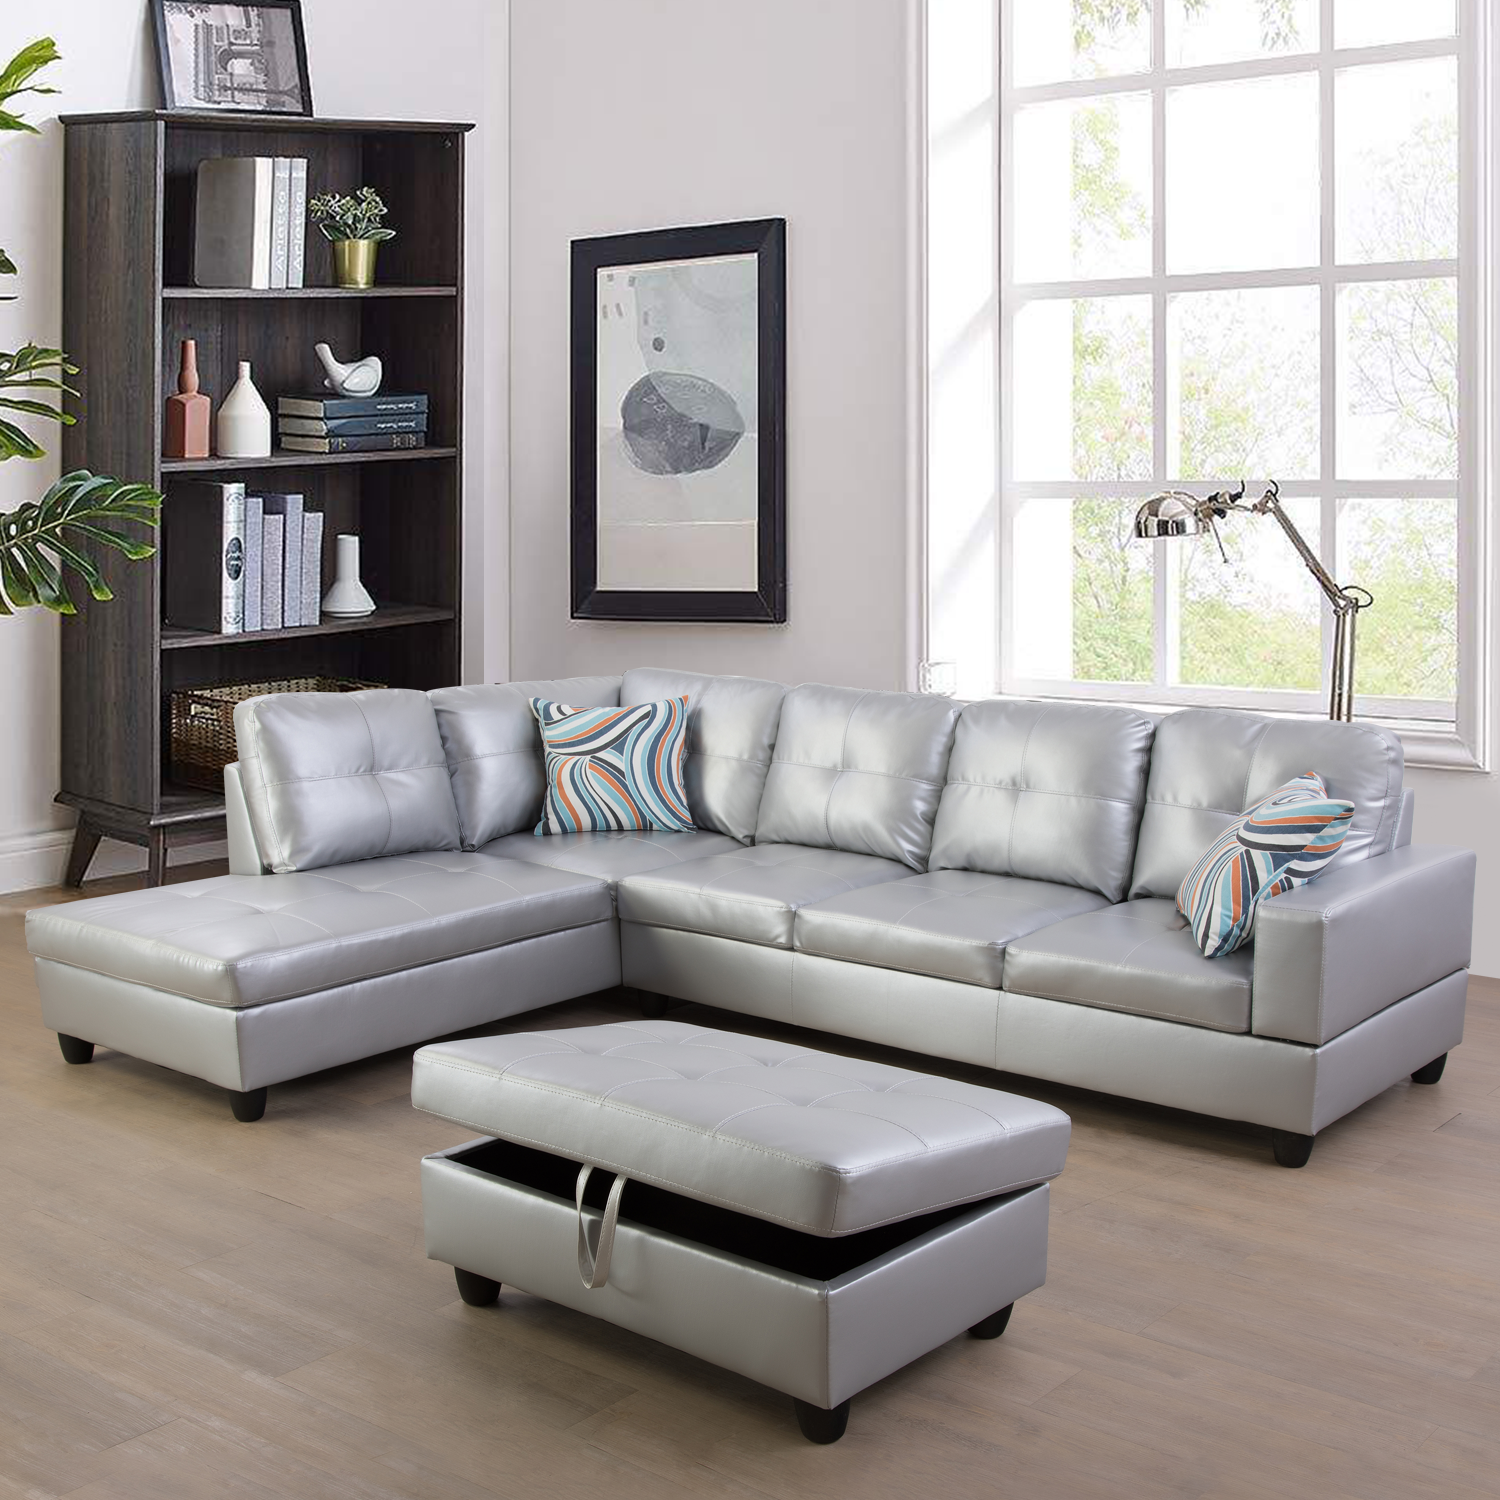 Ainehome L-Shaped Sofa Set in Silver and White Leather